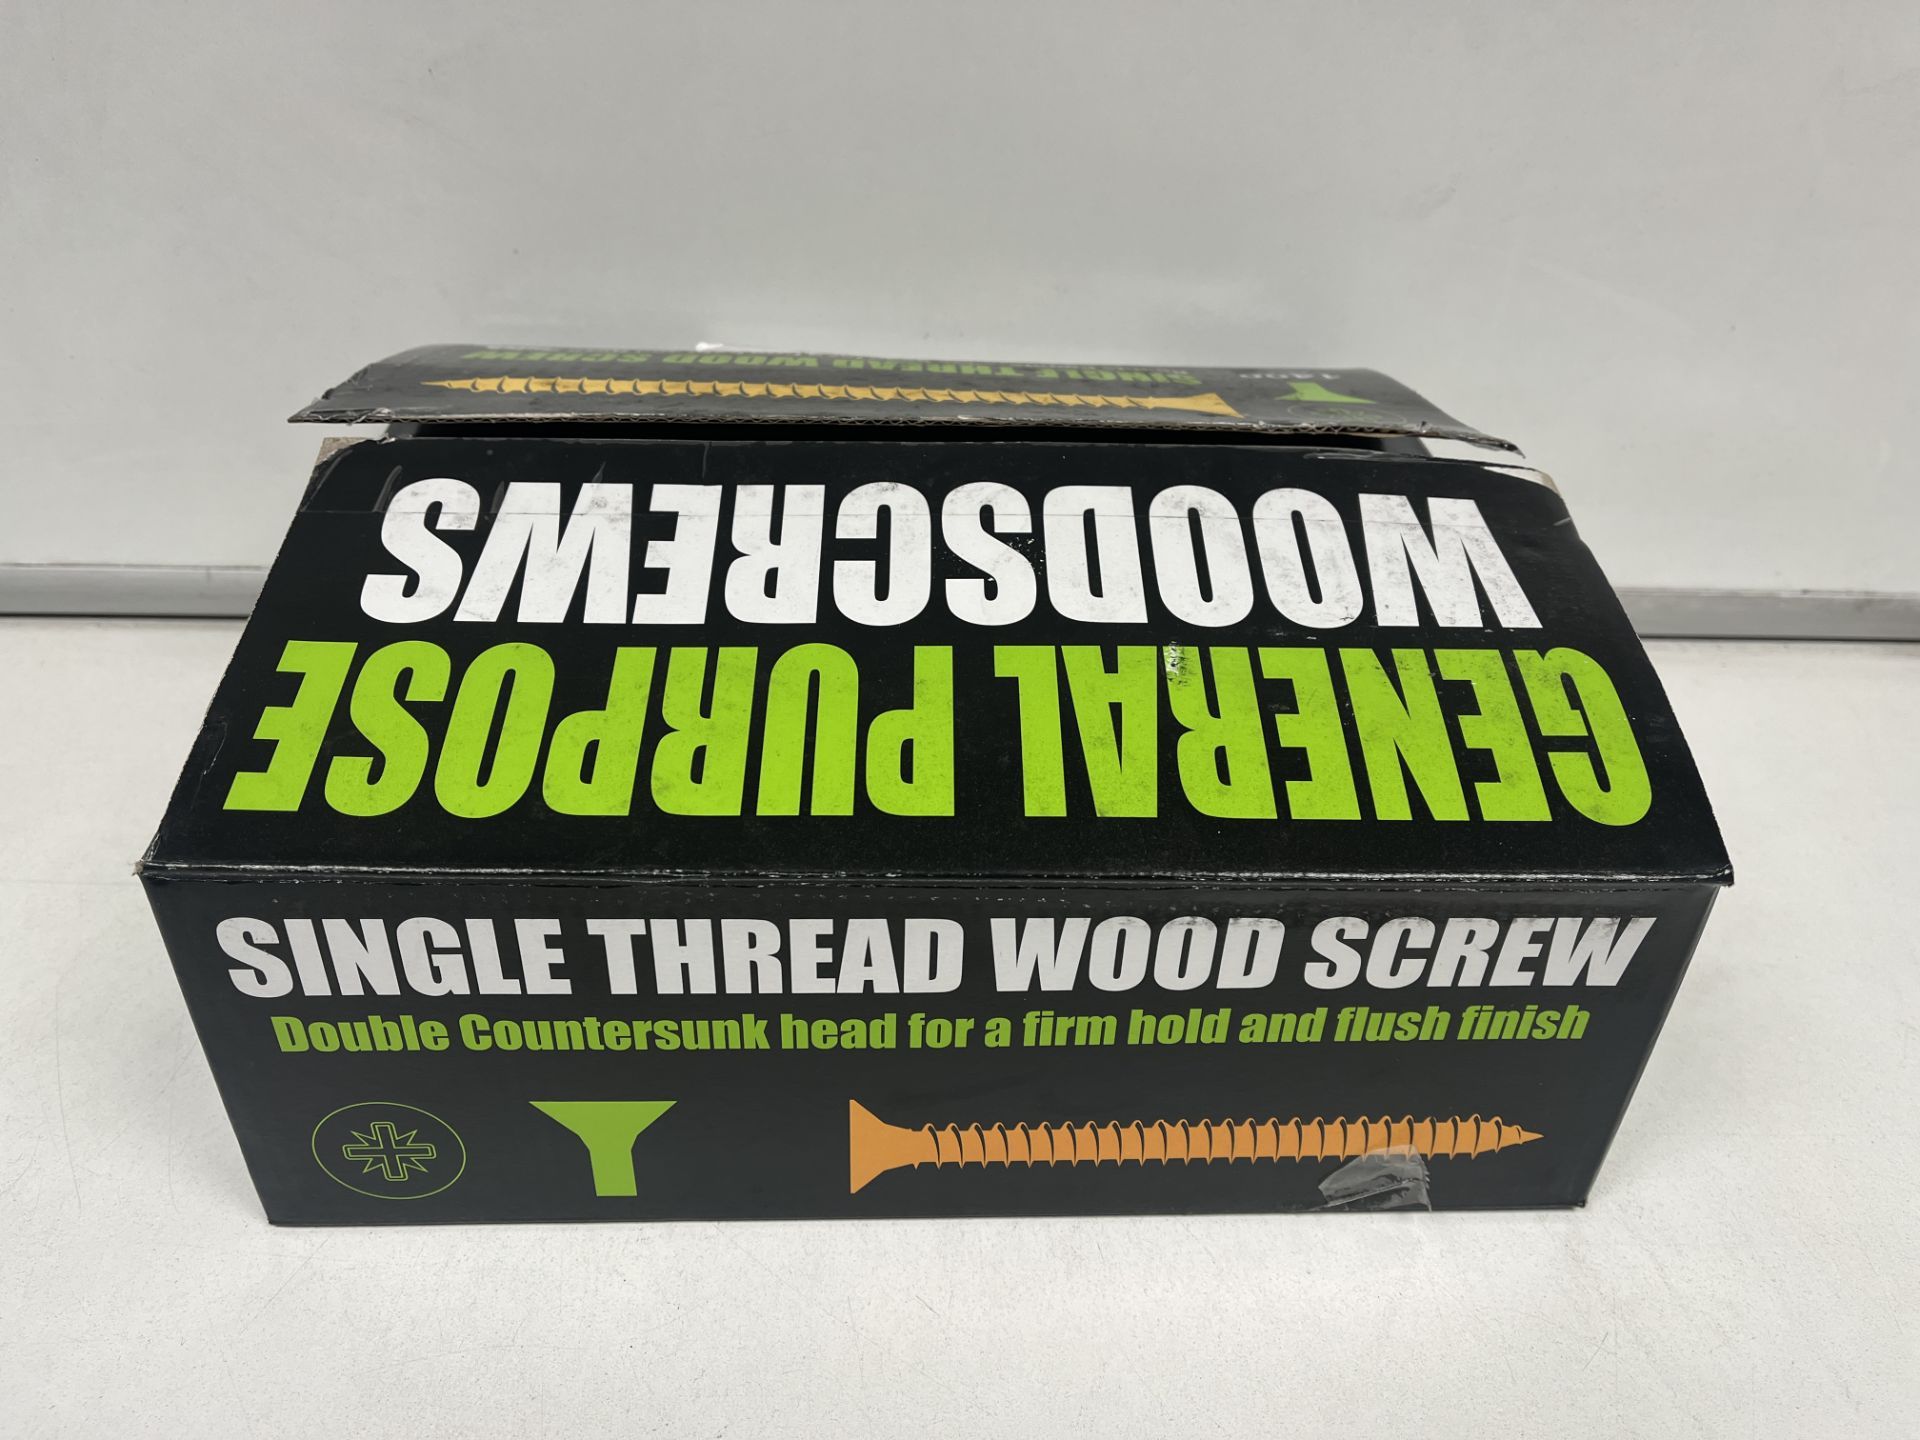 TRADE LOT 12 X NEW BOXES OF 1400 SINGLE THREAD GENERAL PURPOSE WOODSCREWS IN ASSORTED SIZES.